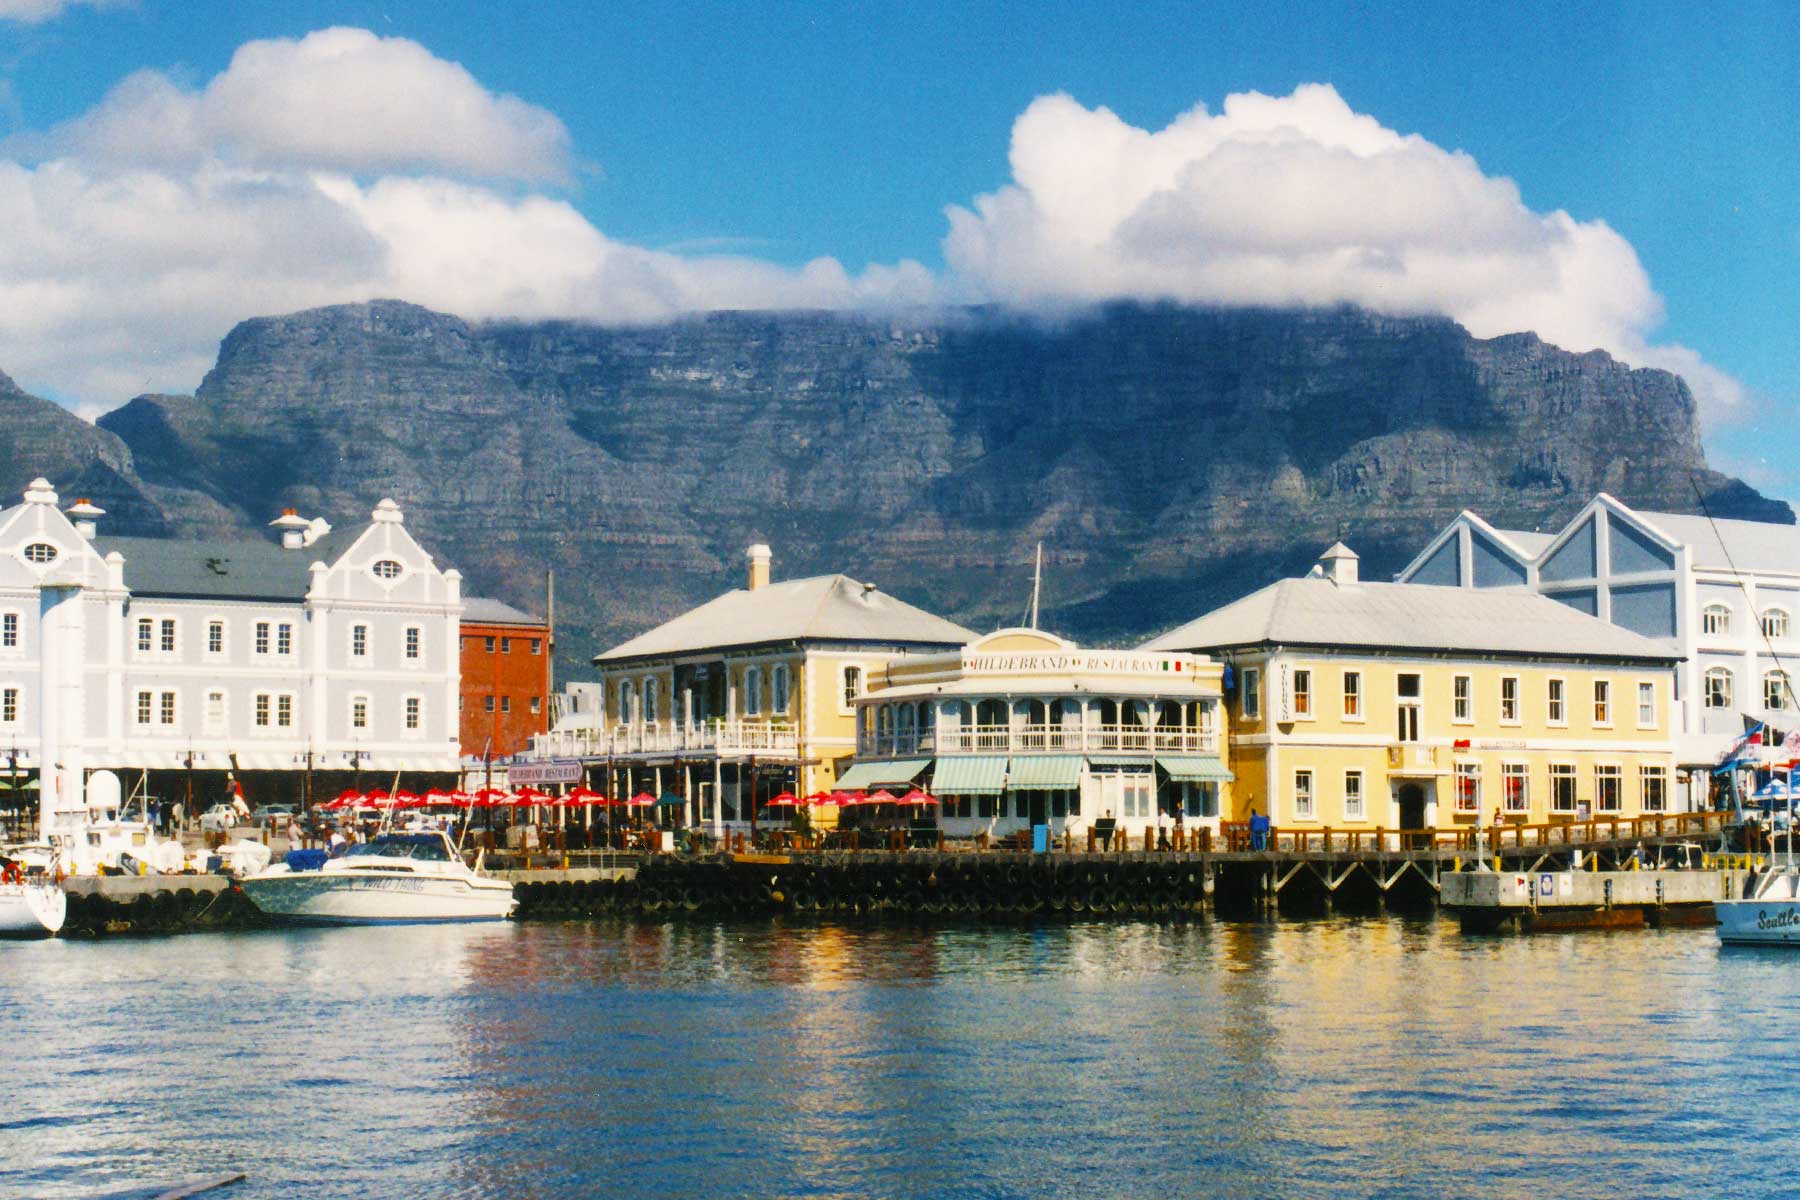 Waterfront - Cape Town - Steven Andrew Martin PhD - South Africa Photo Journal